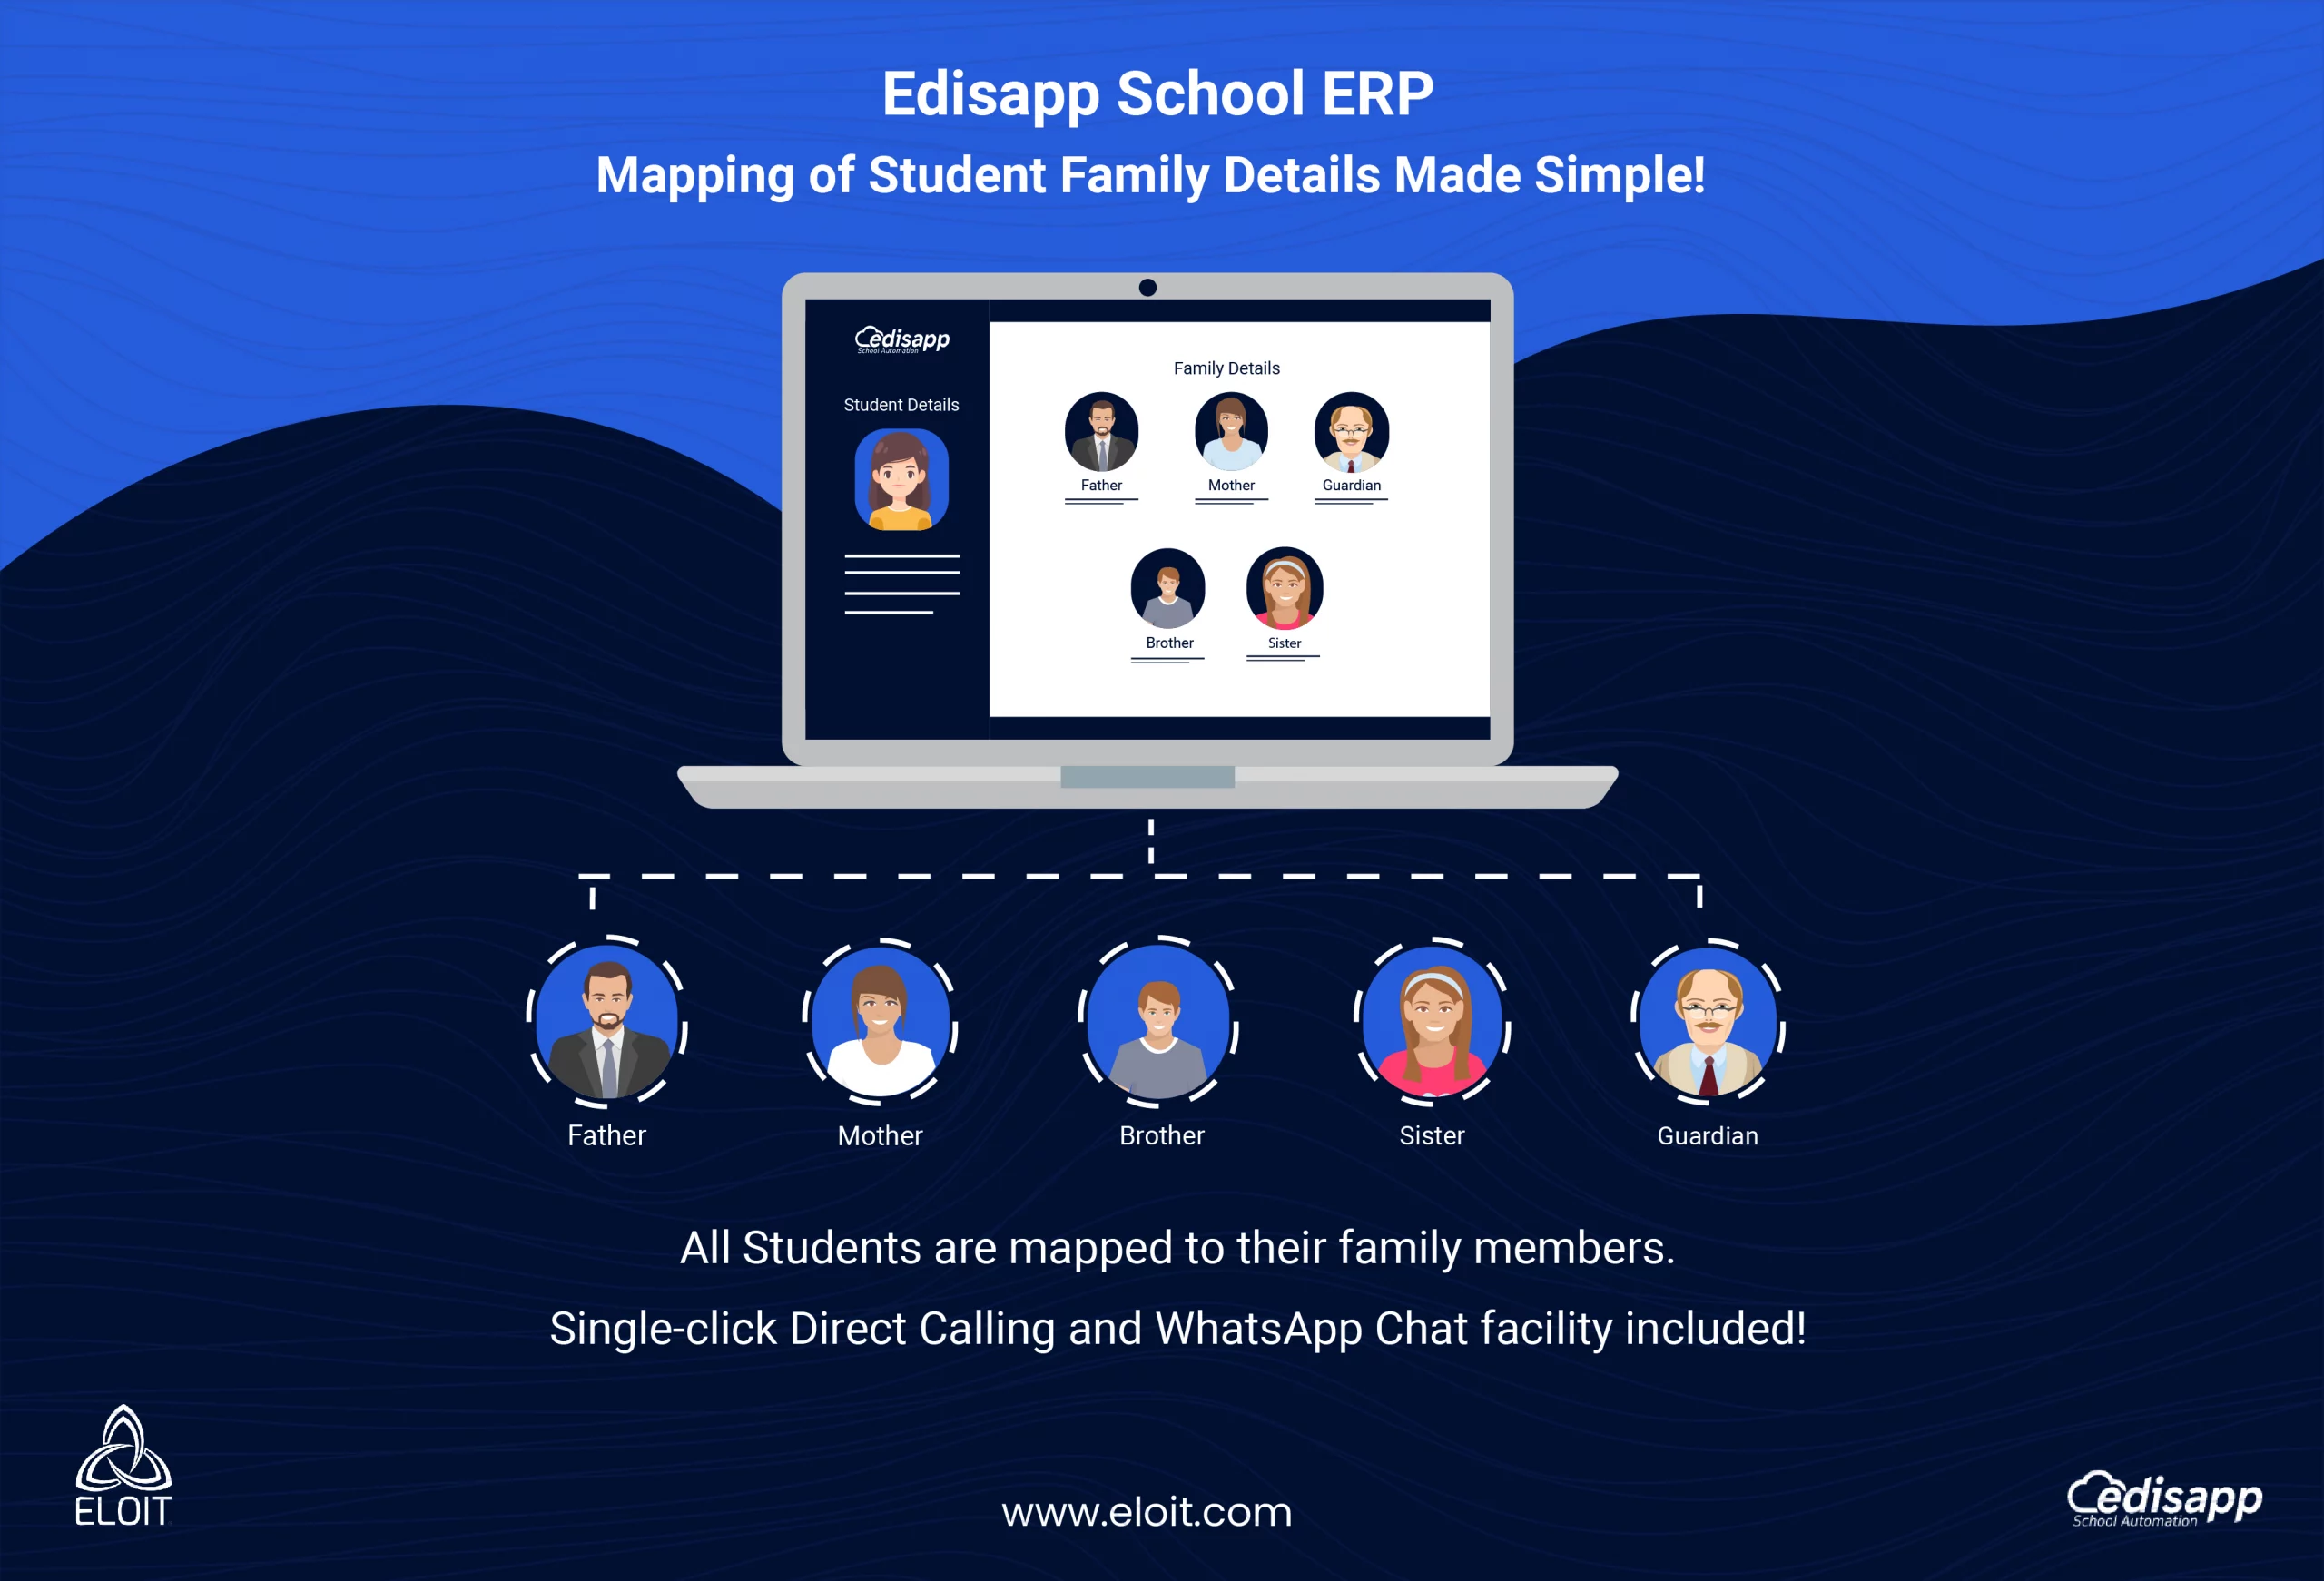 Mapping Family Details of Students Made Simple!